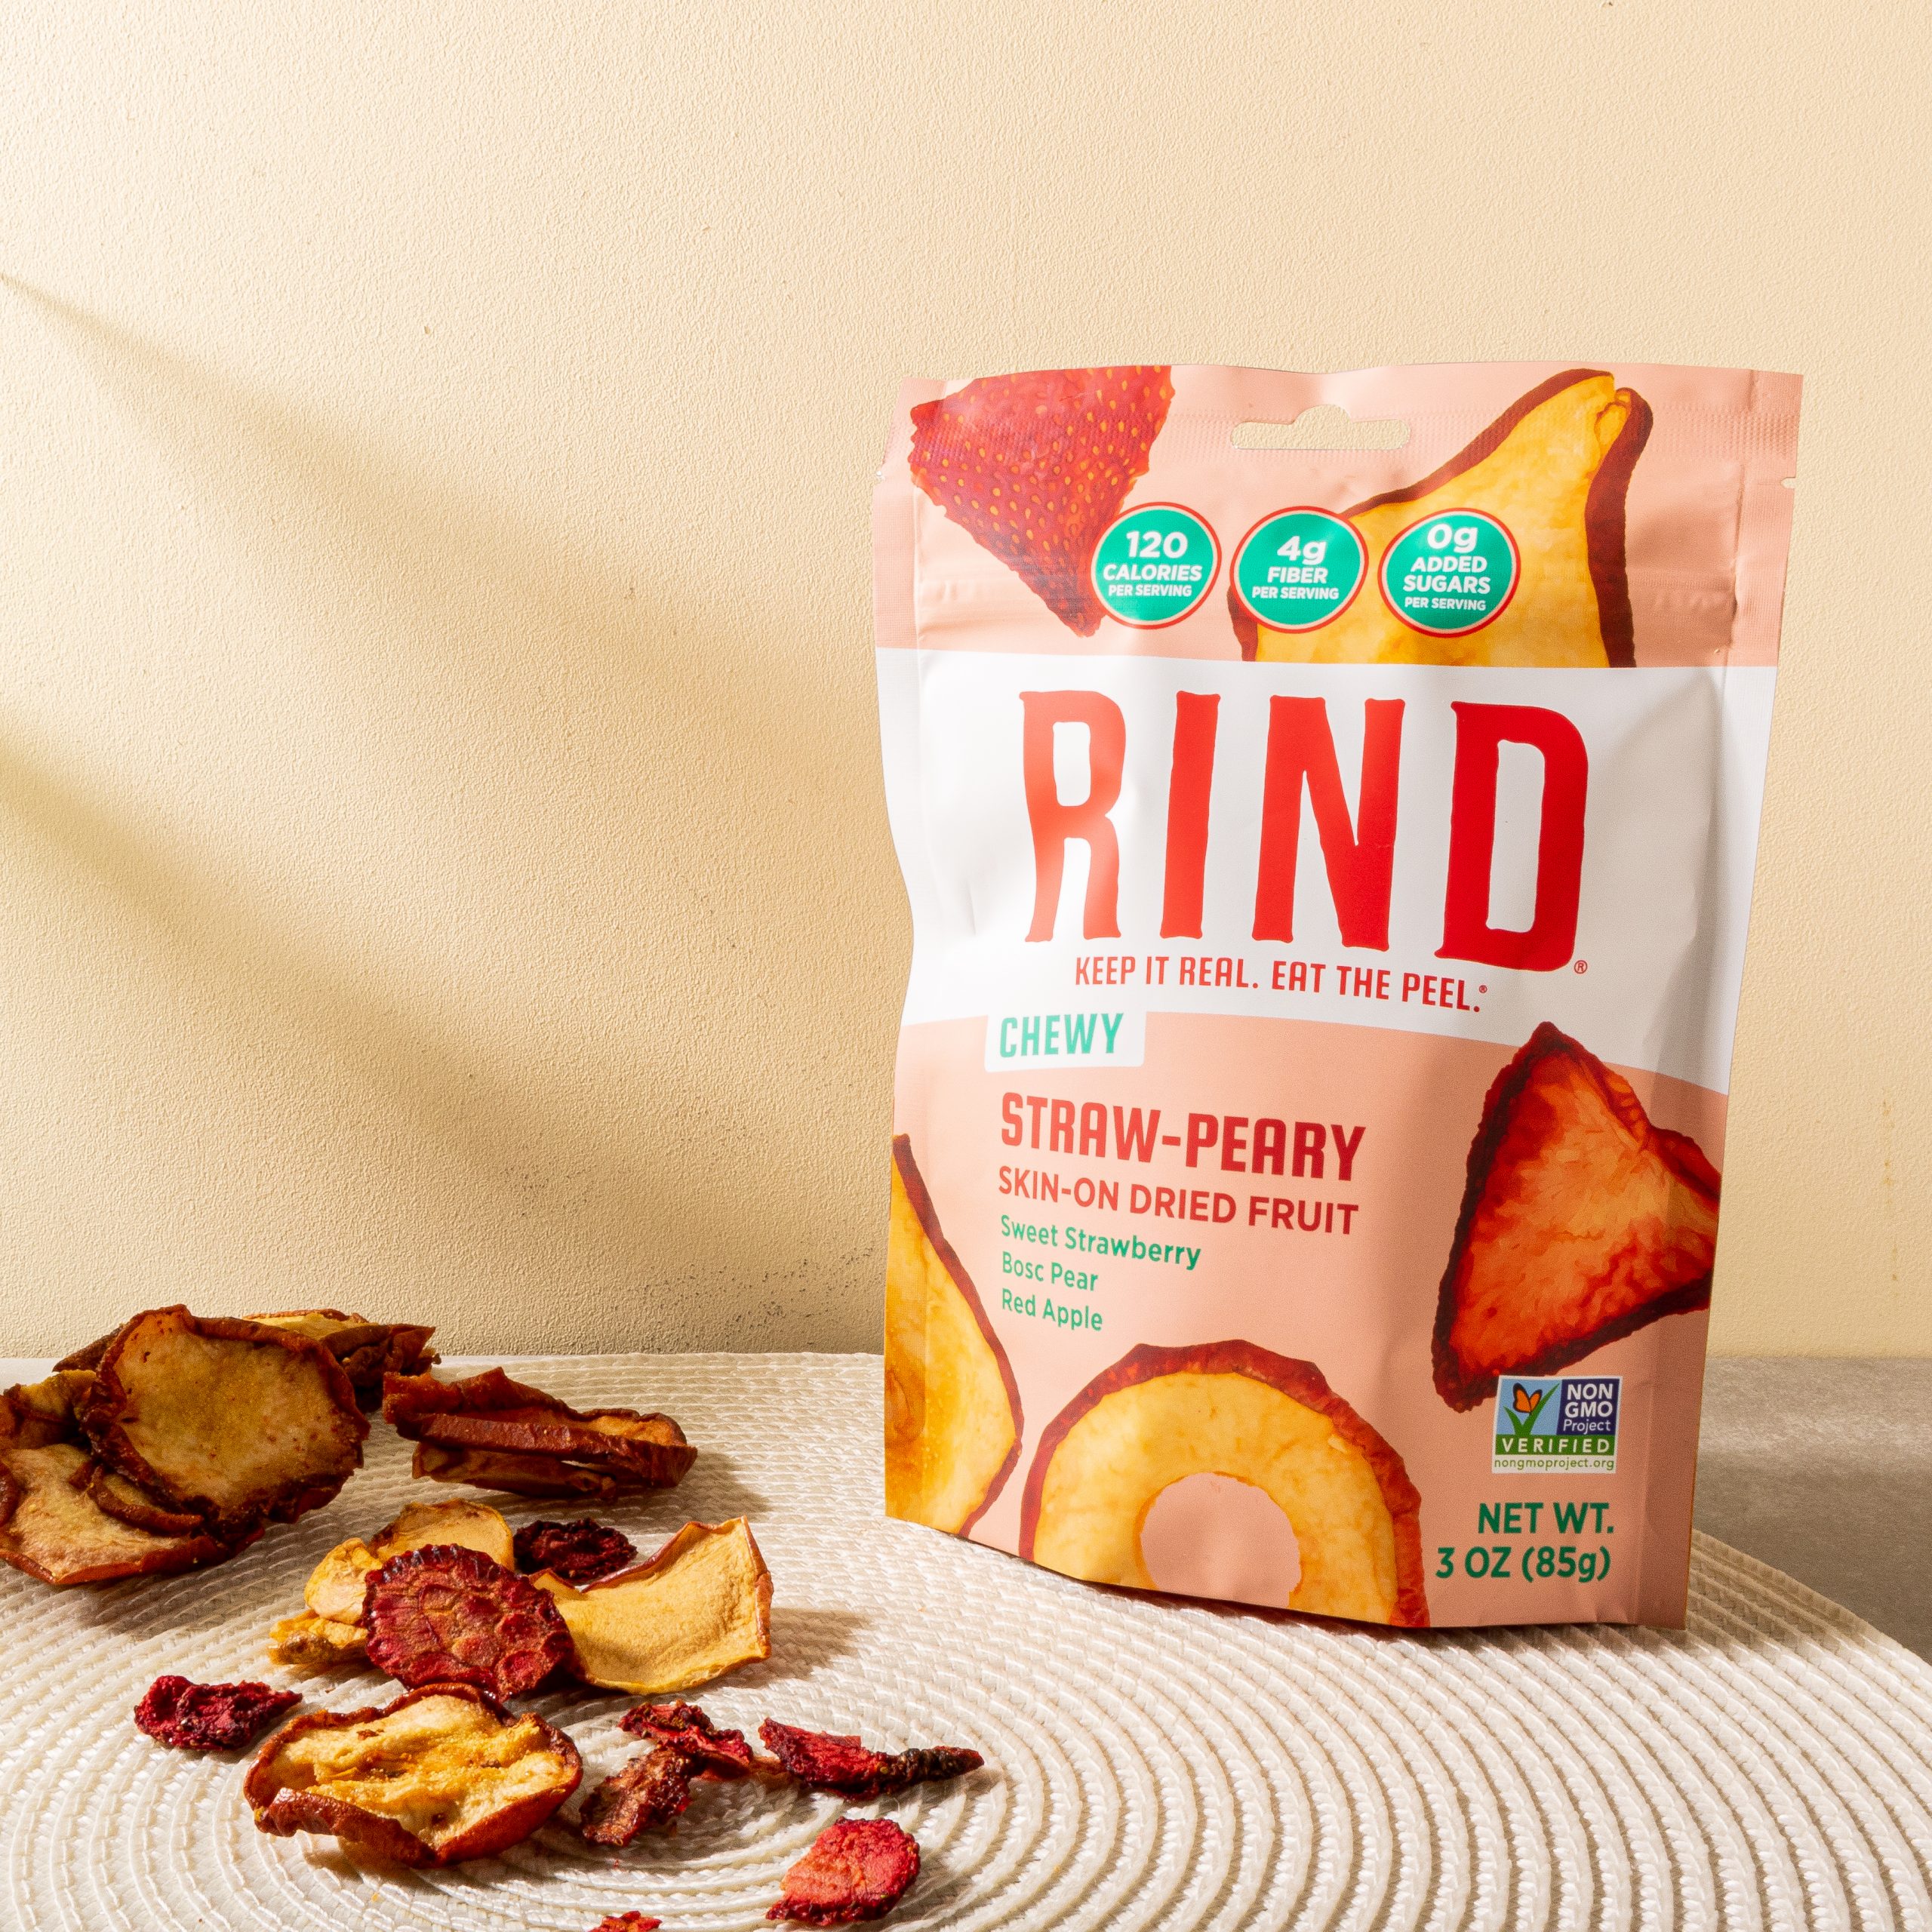 Straw-Peary Dried Fruit Blend